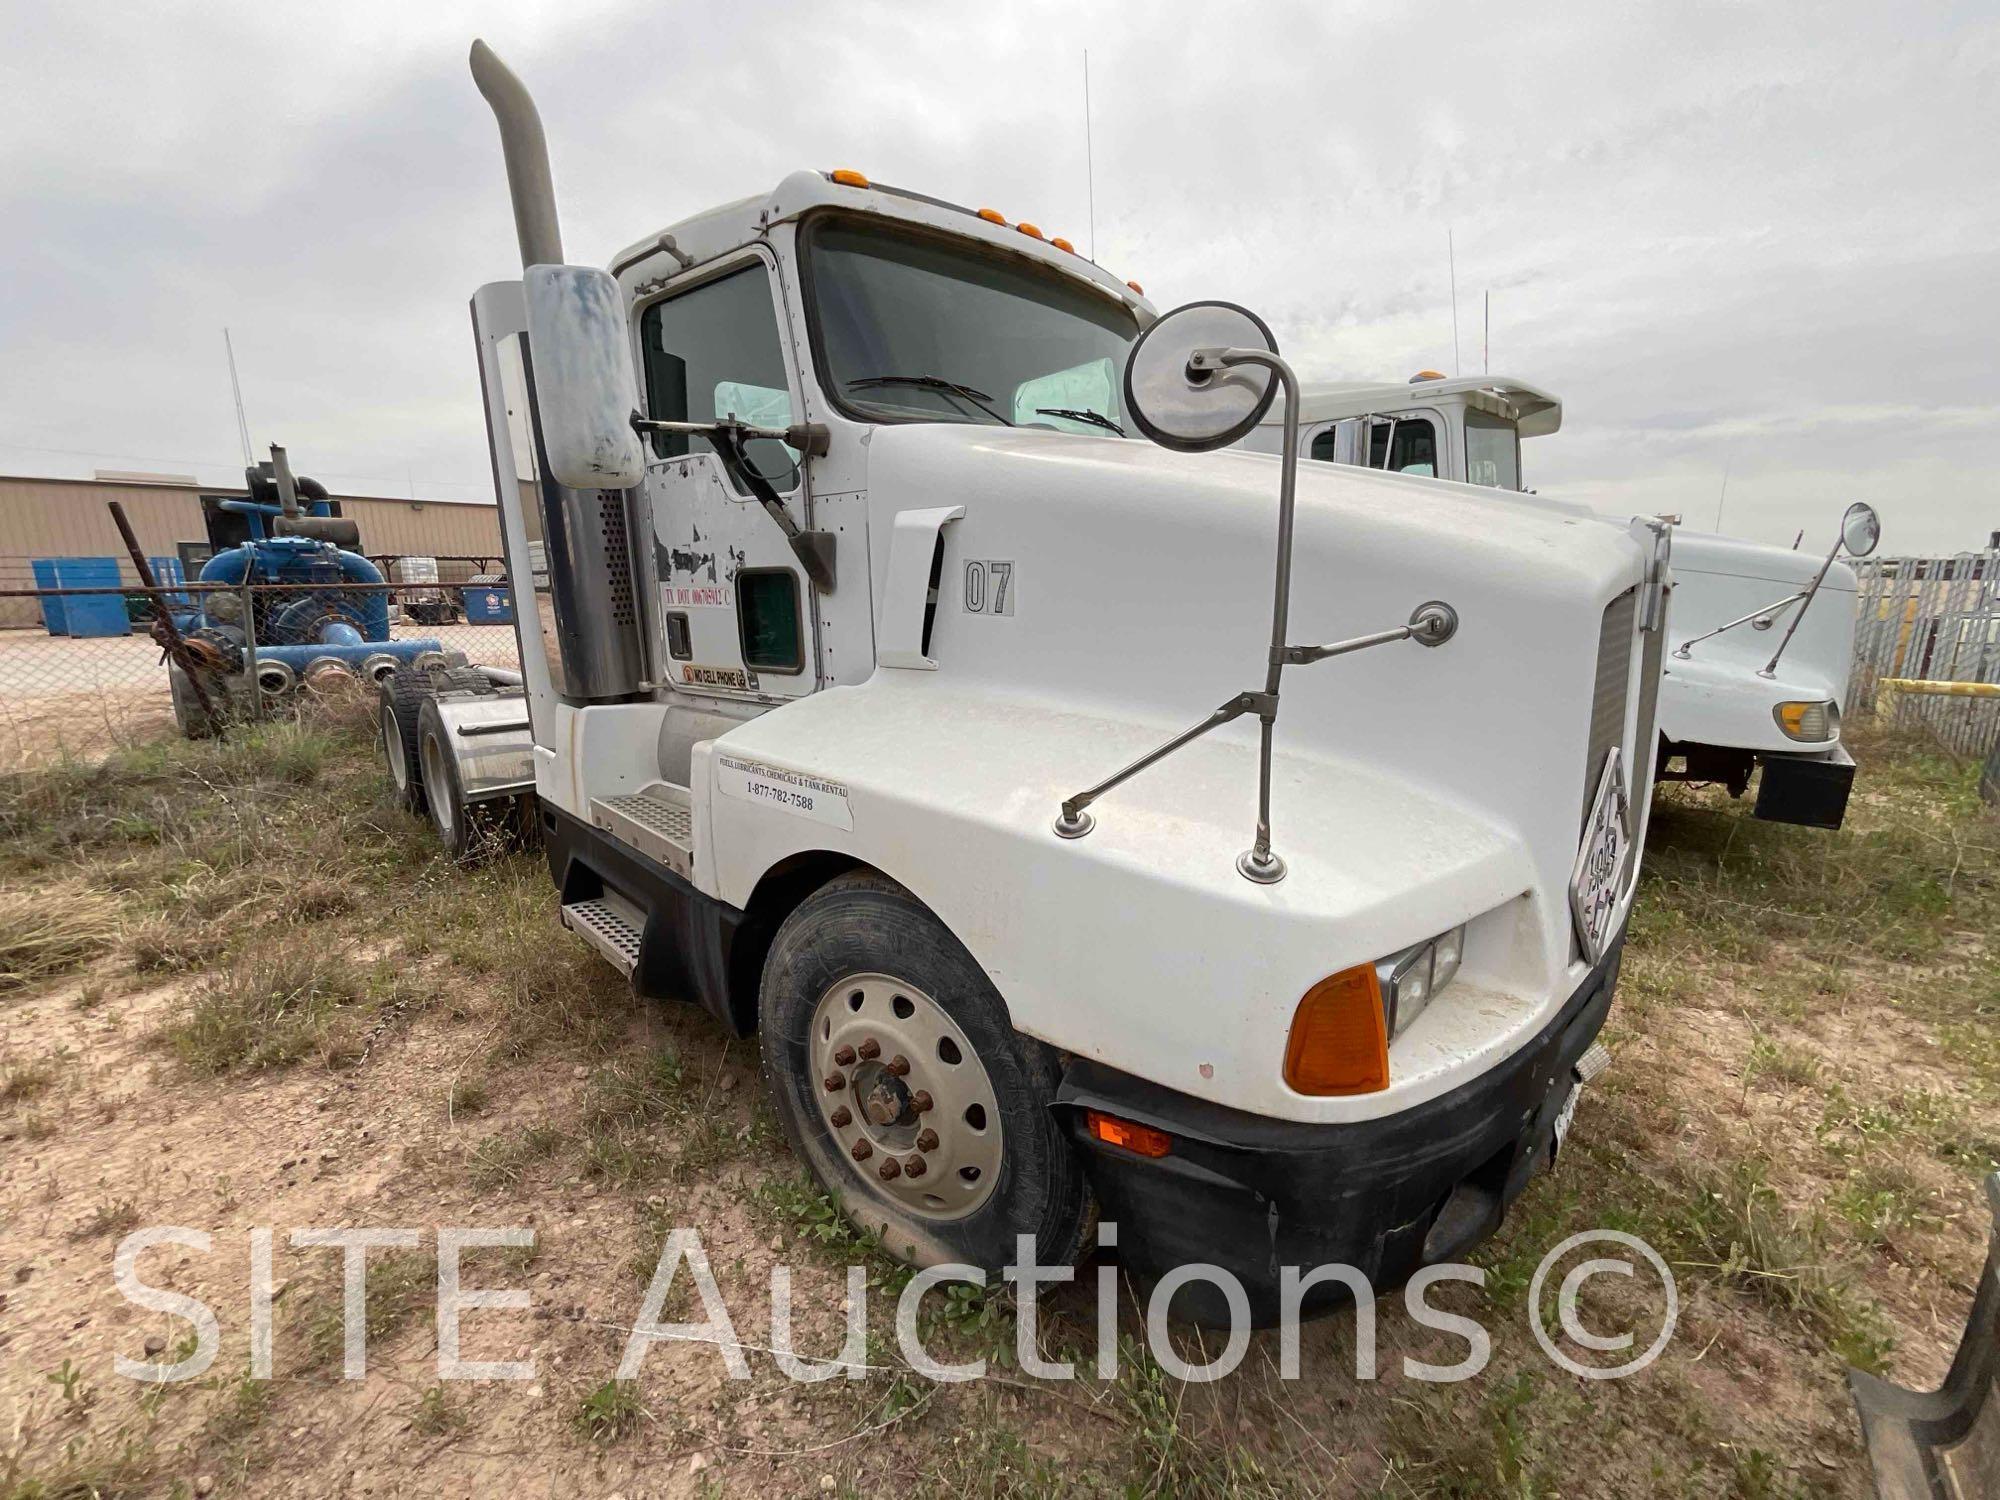 1996 Kenworth T600B T/A Daycab Truck Tractor